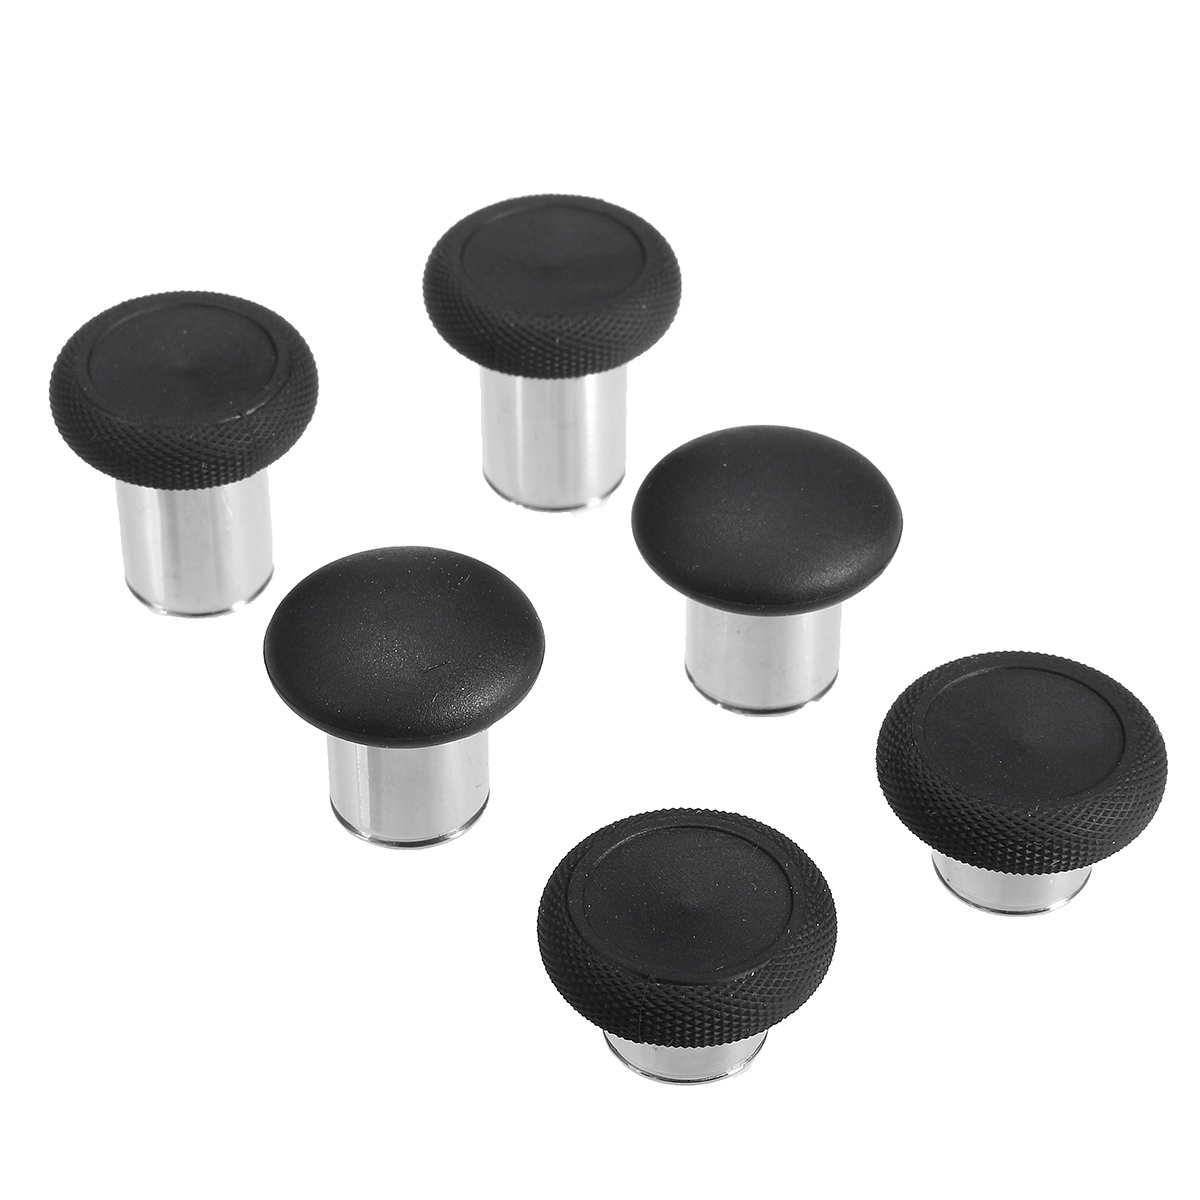 10Pcs-Metal-Controller-Thumbsticks-Buttons-Grip-Mod-Replacement-Kit-For-Xbox-one-Elite-For-Sony-Play-1414635